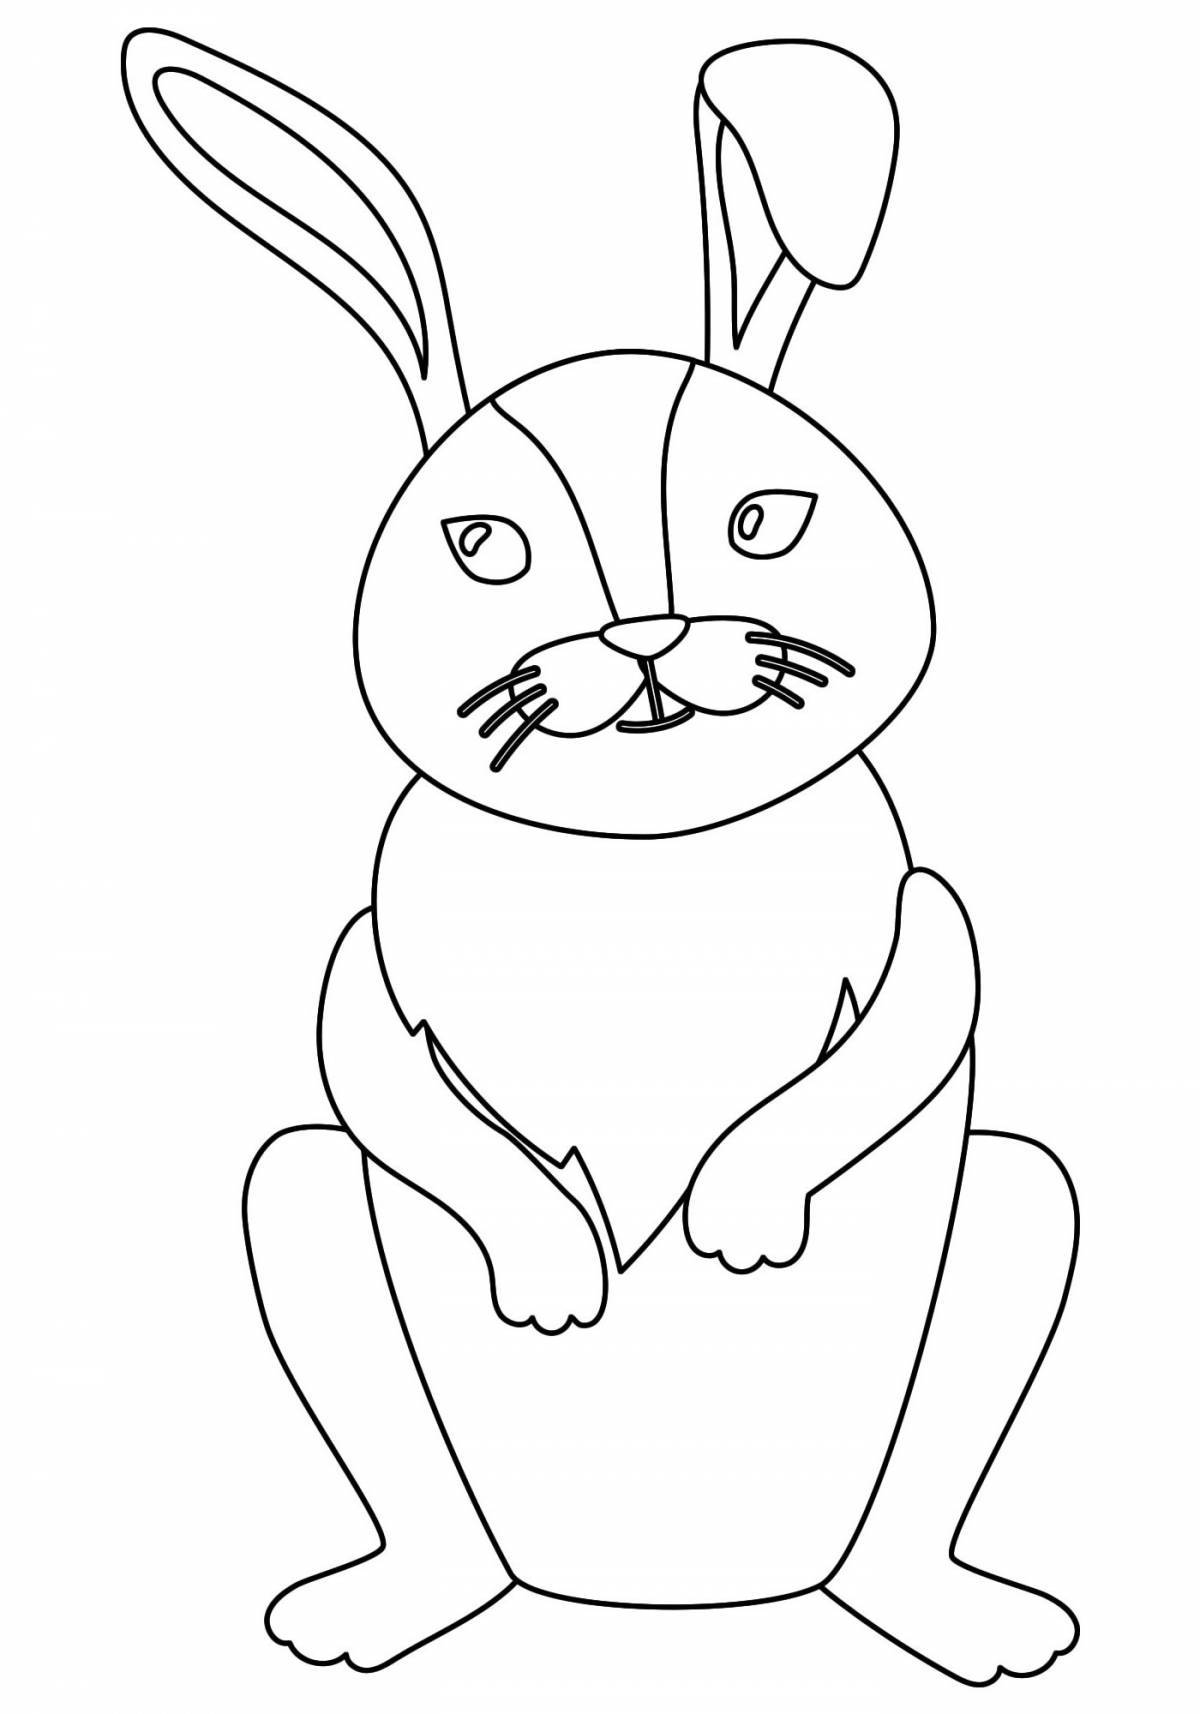 Coloring book cute hare for children 3-4 years old